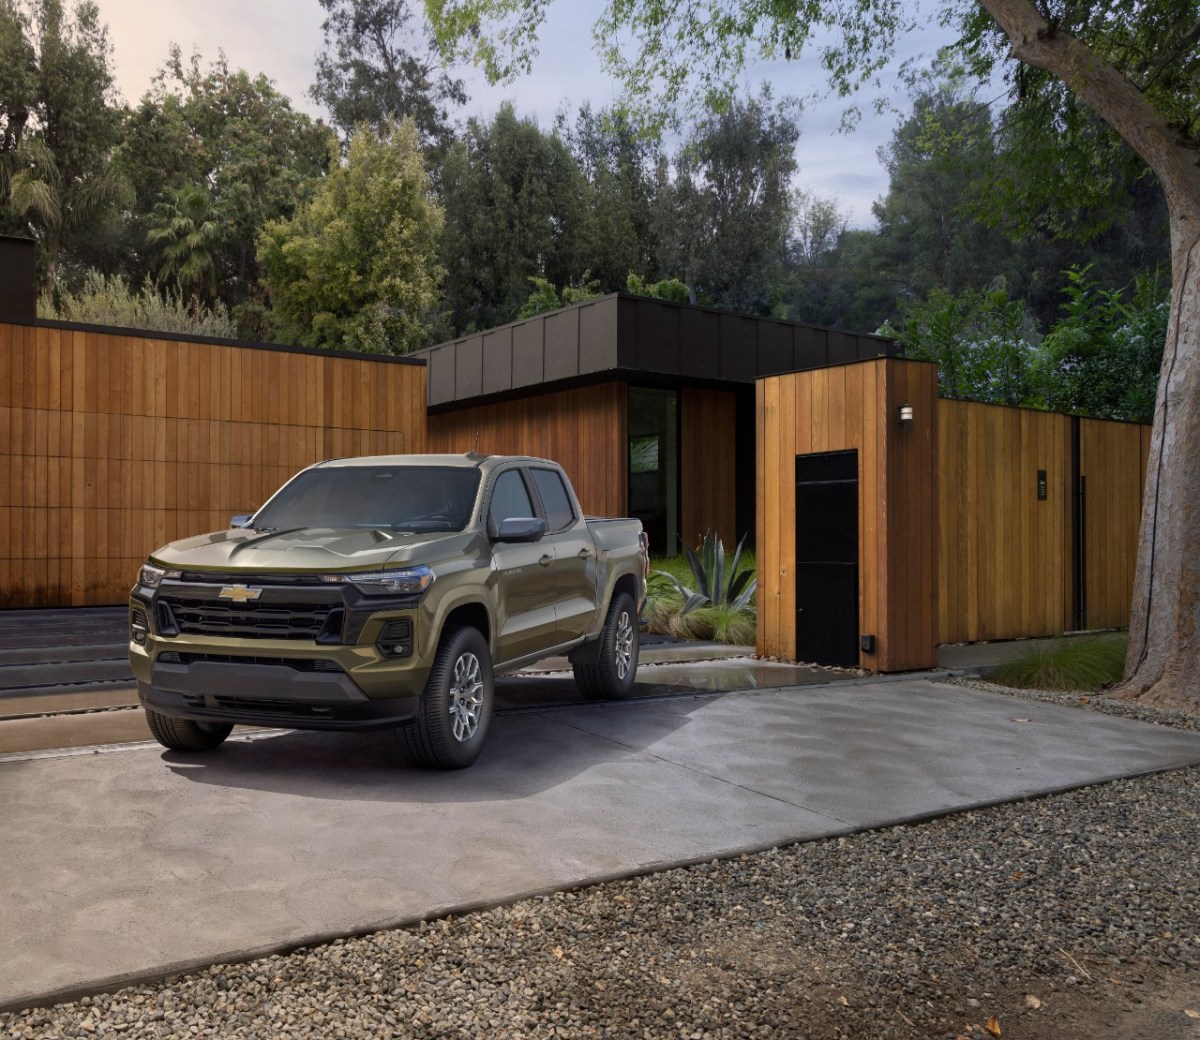 2023 Chevy Colorado in brown parked at a modern house